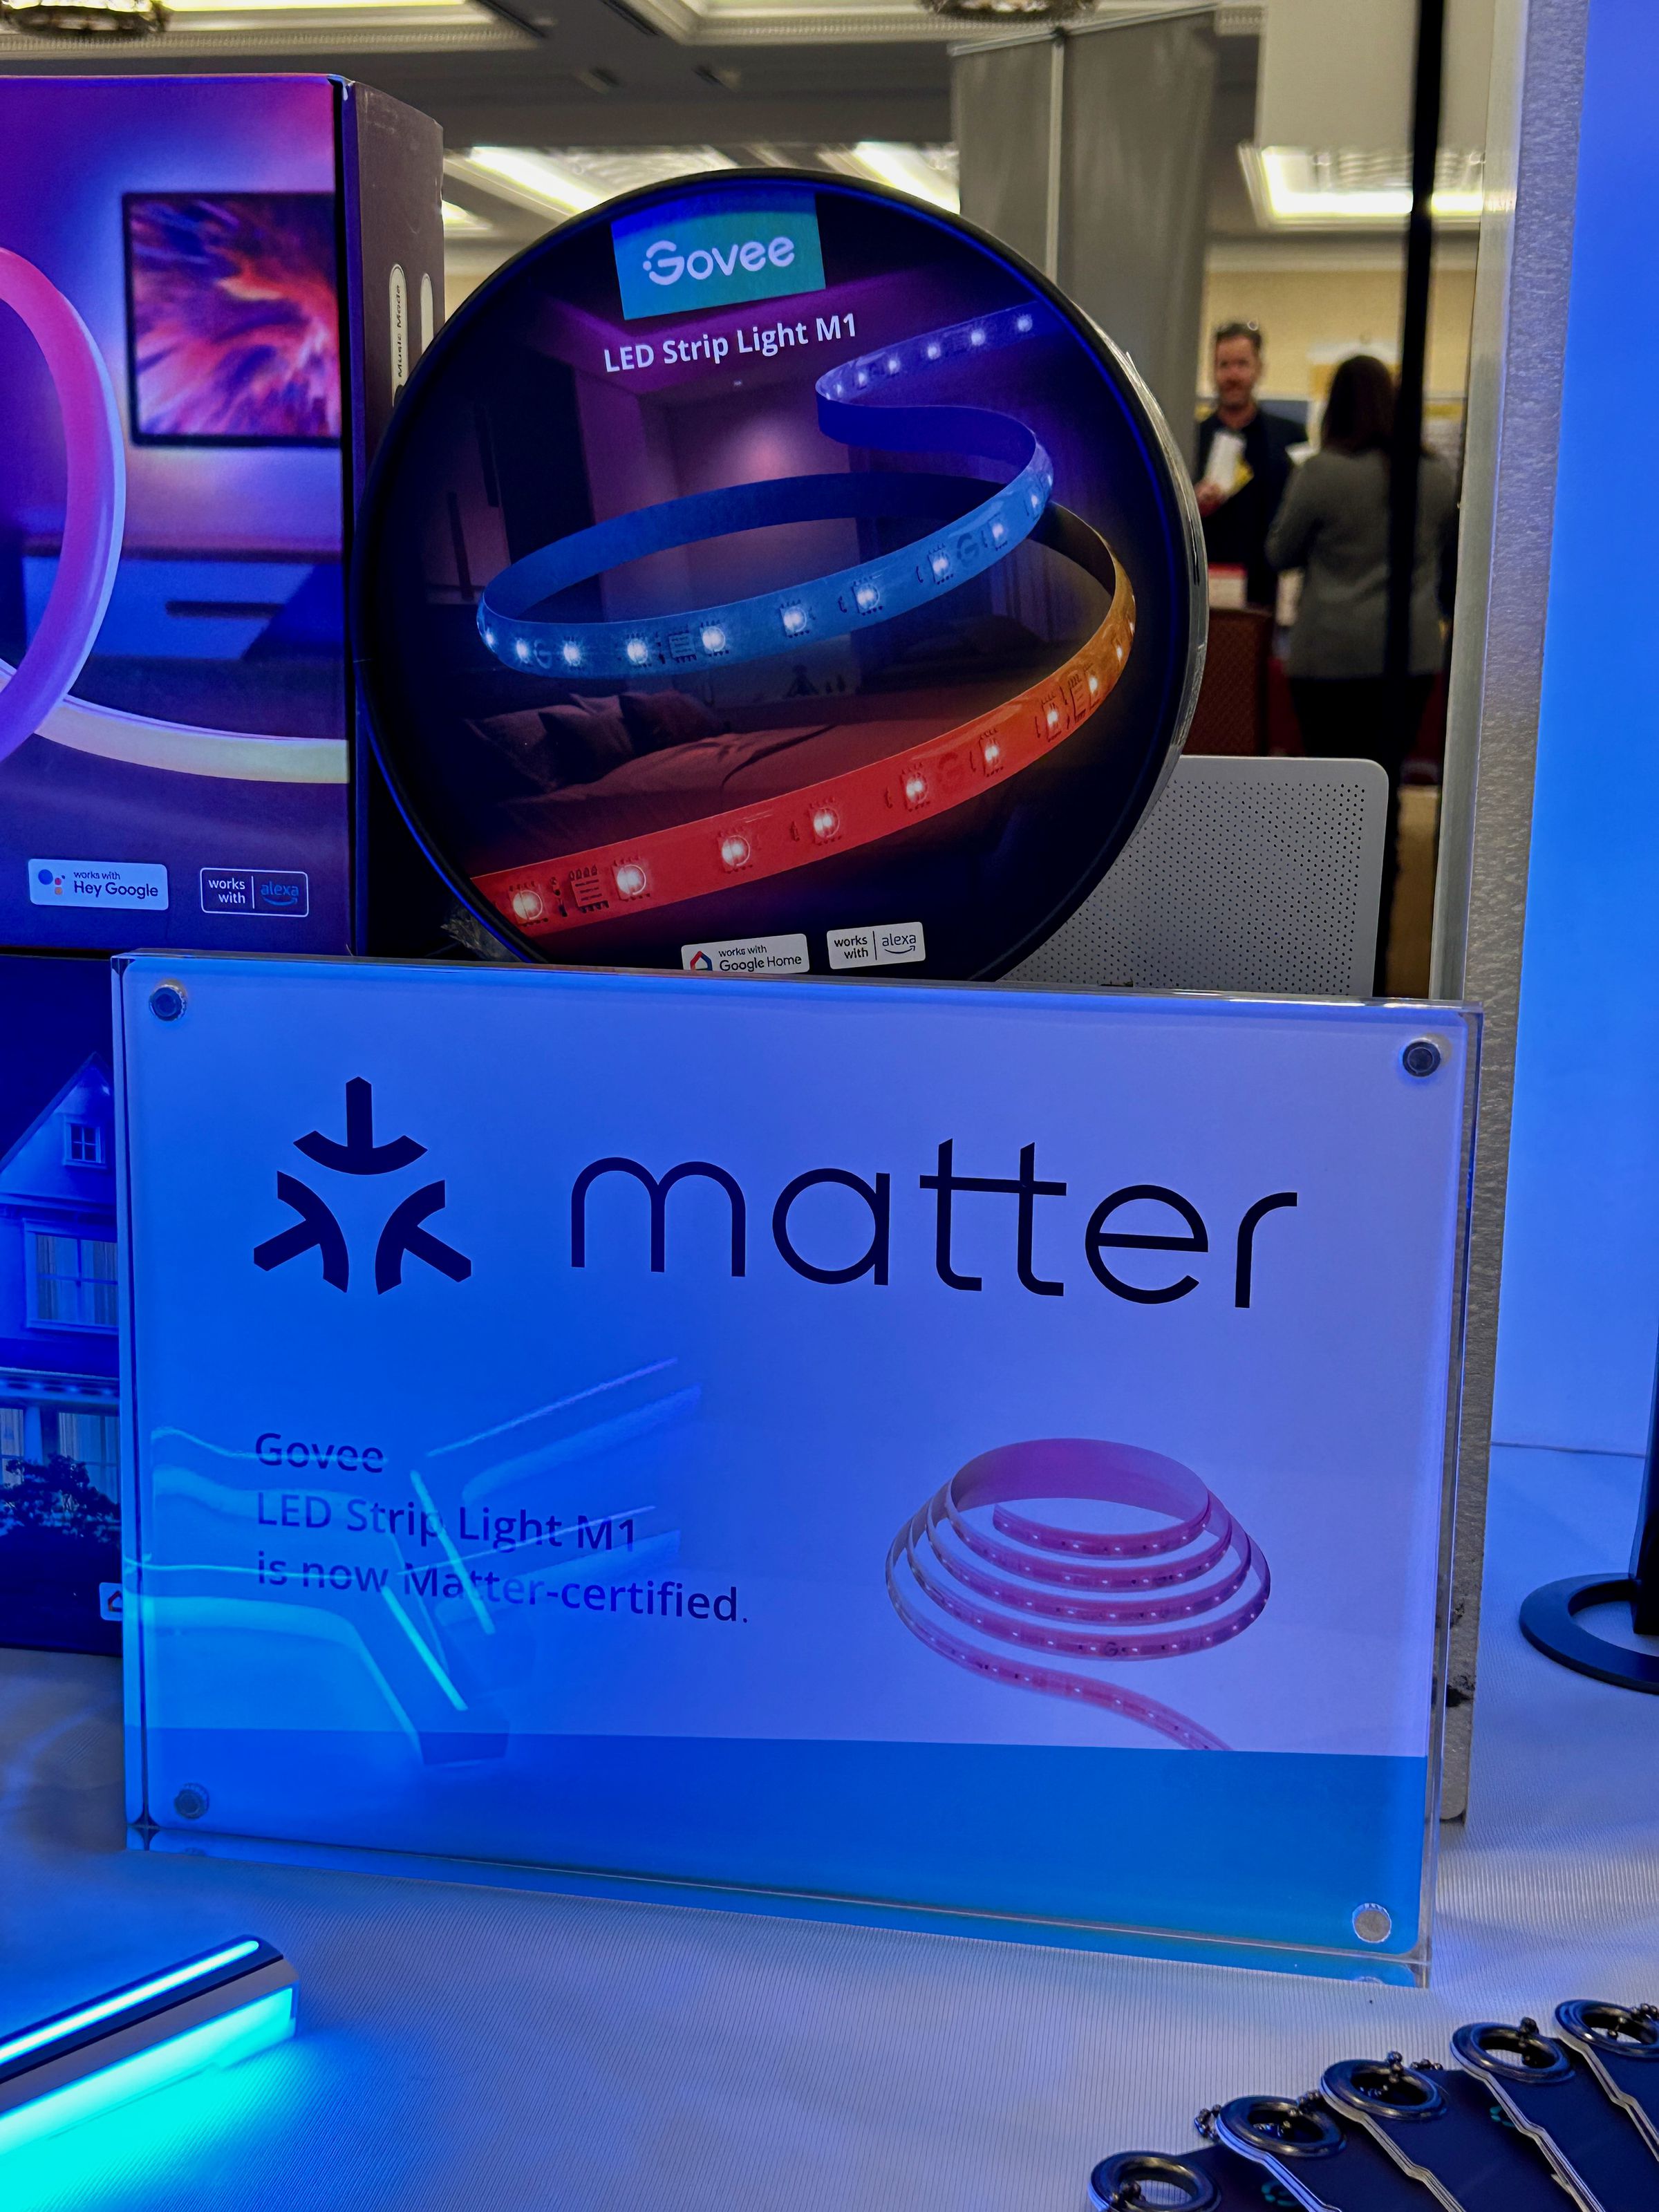 A large sign that says Matter and shows a picture of a light strip in front of a box for a Govee light strip.